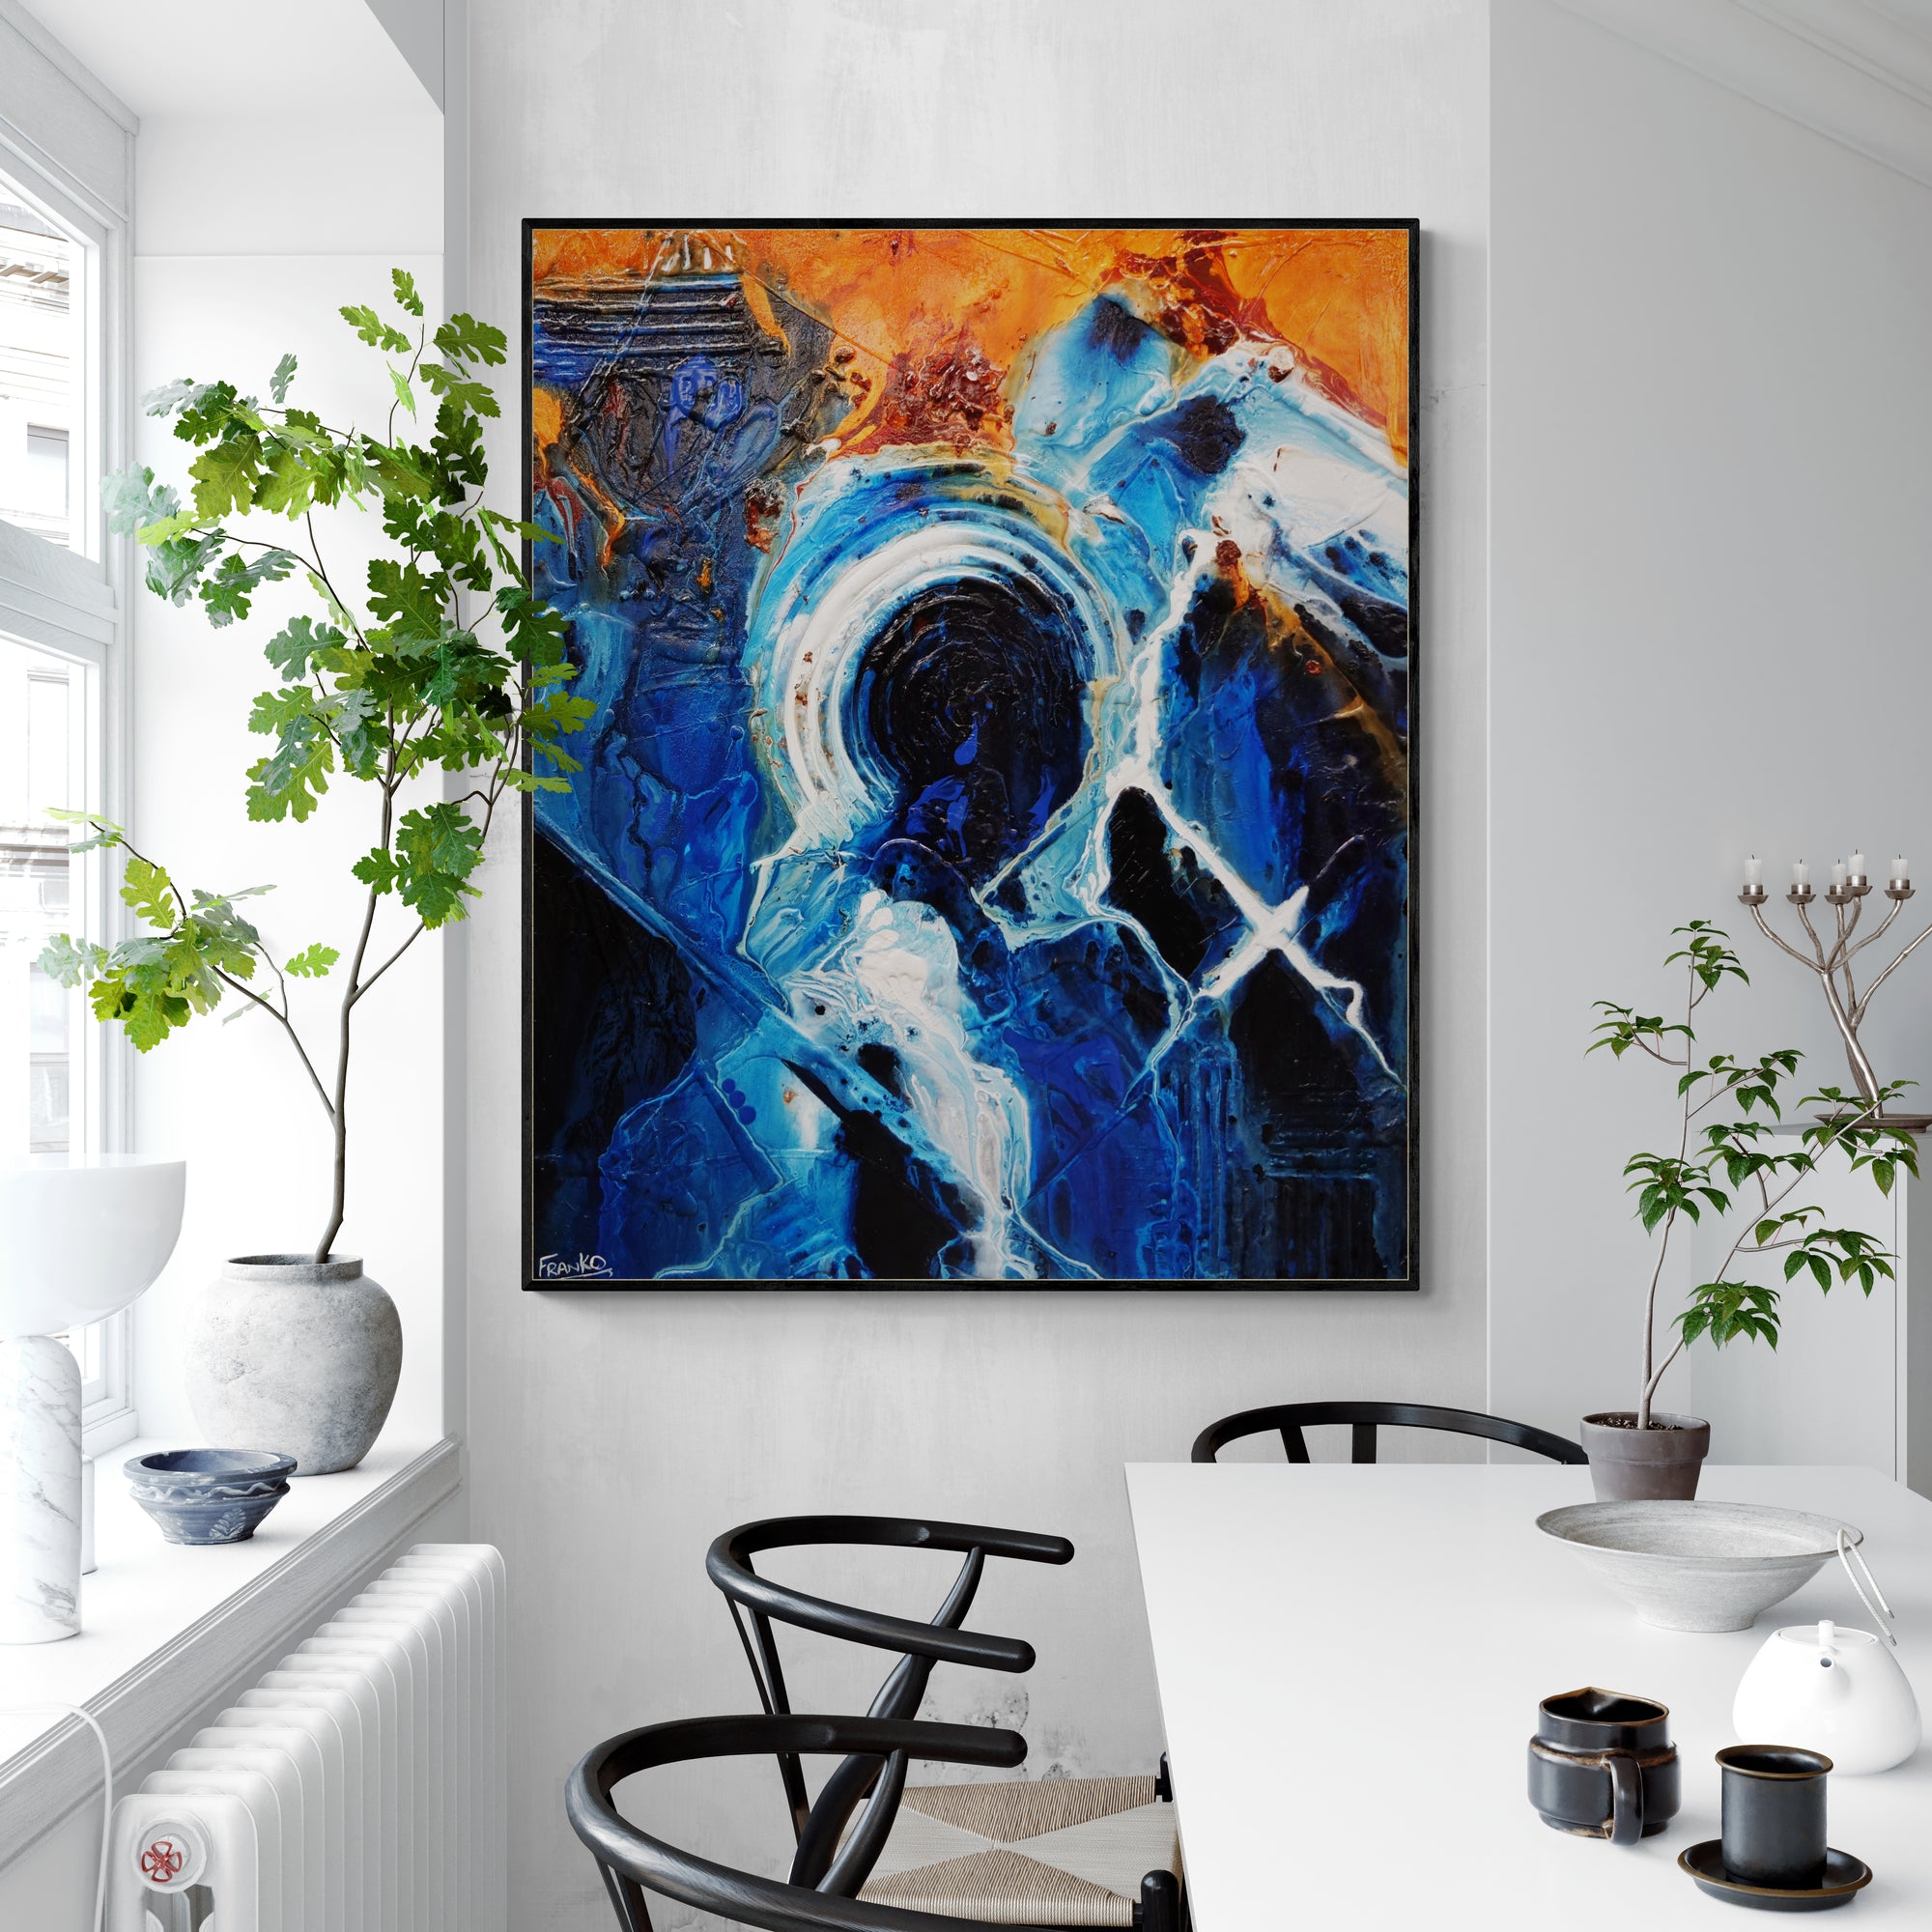 Leather and Sapphires 120cm x 100cm Blue Orange Textured Abstract Painting